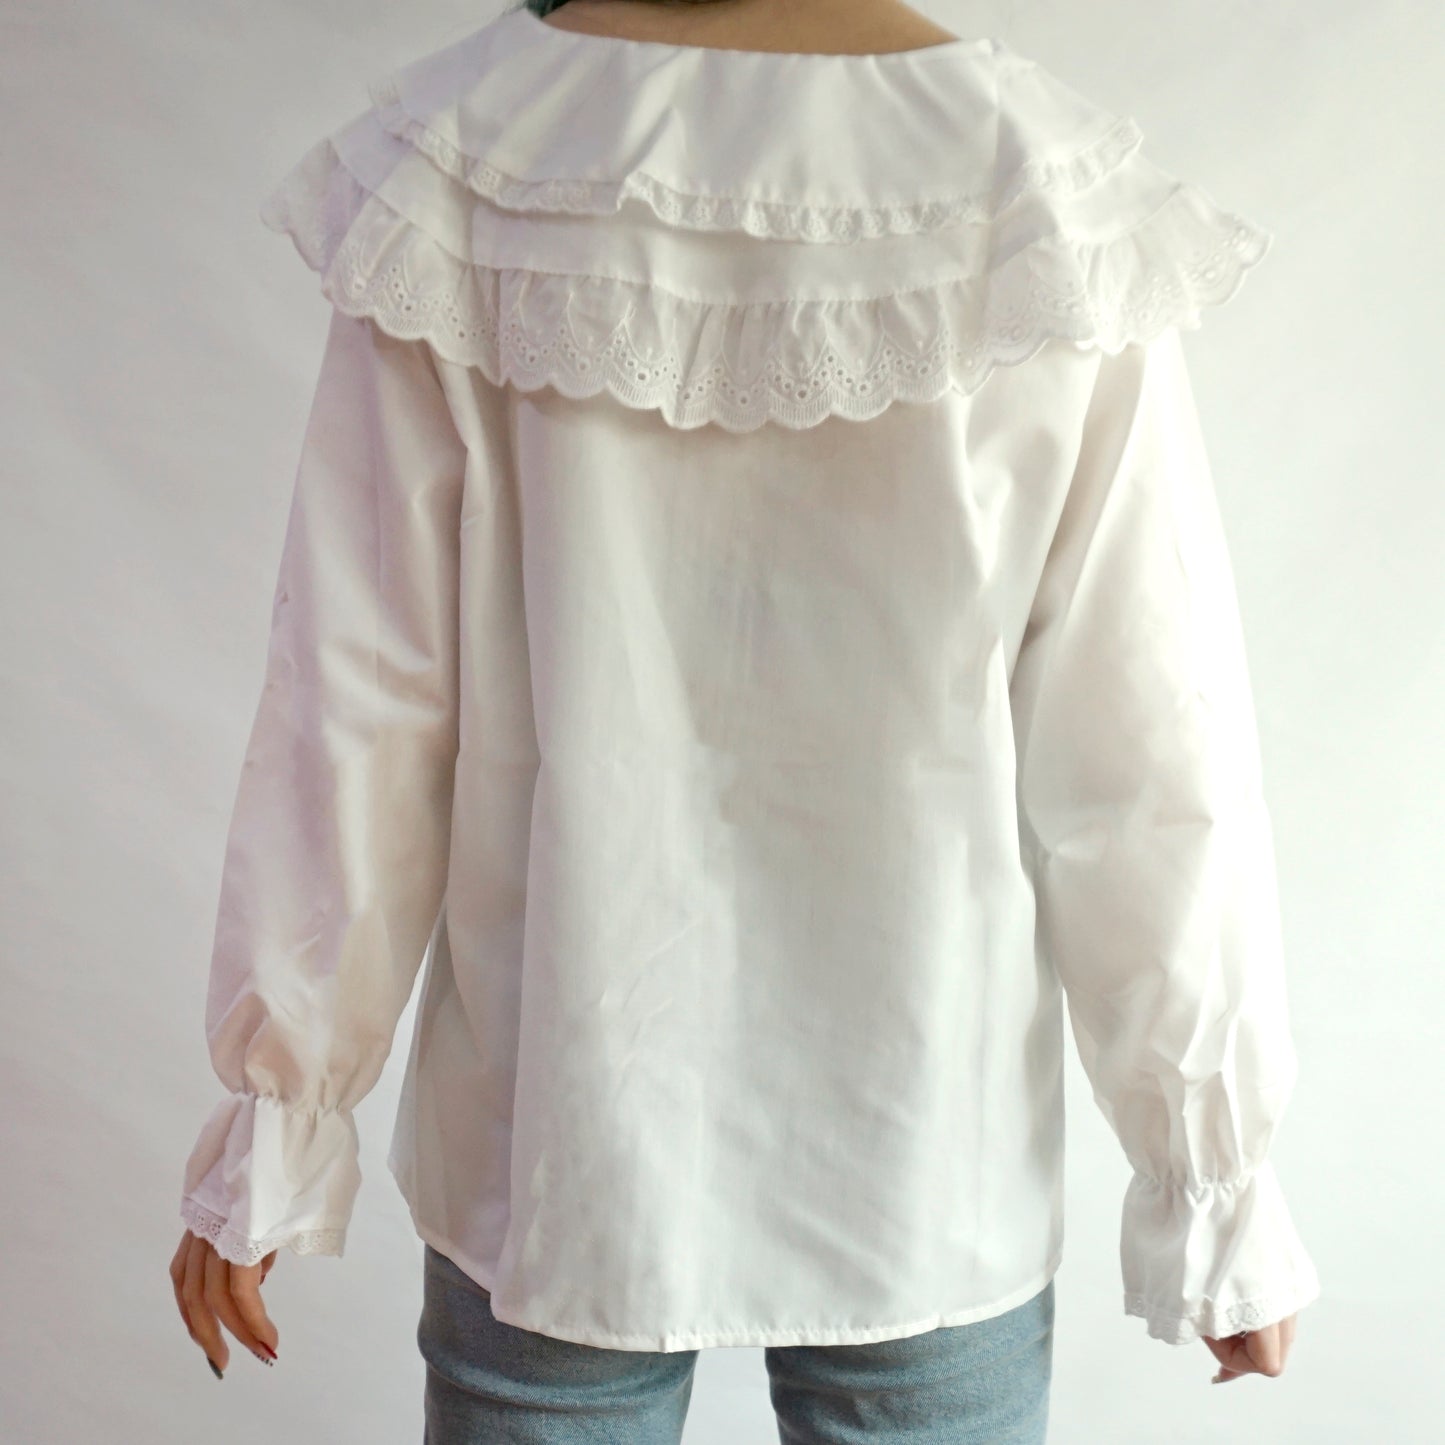 Floral Eyelet Double Peter Pan Button Up Shirt (White)